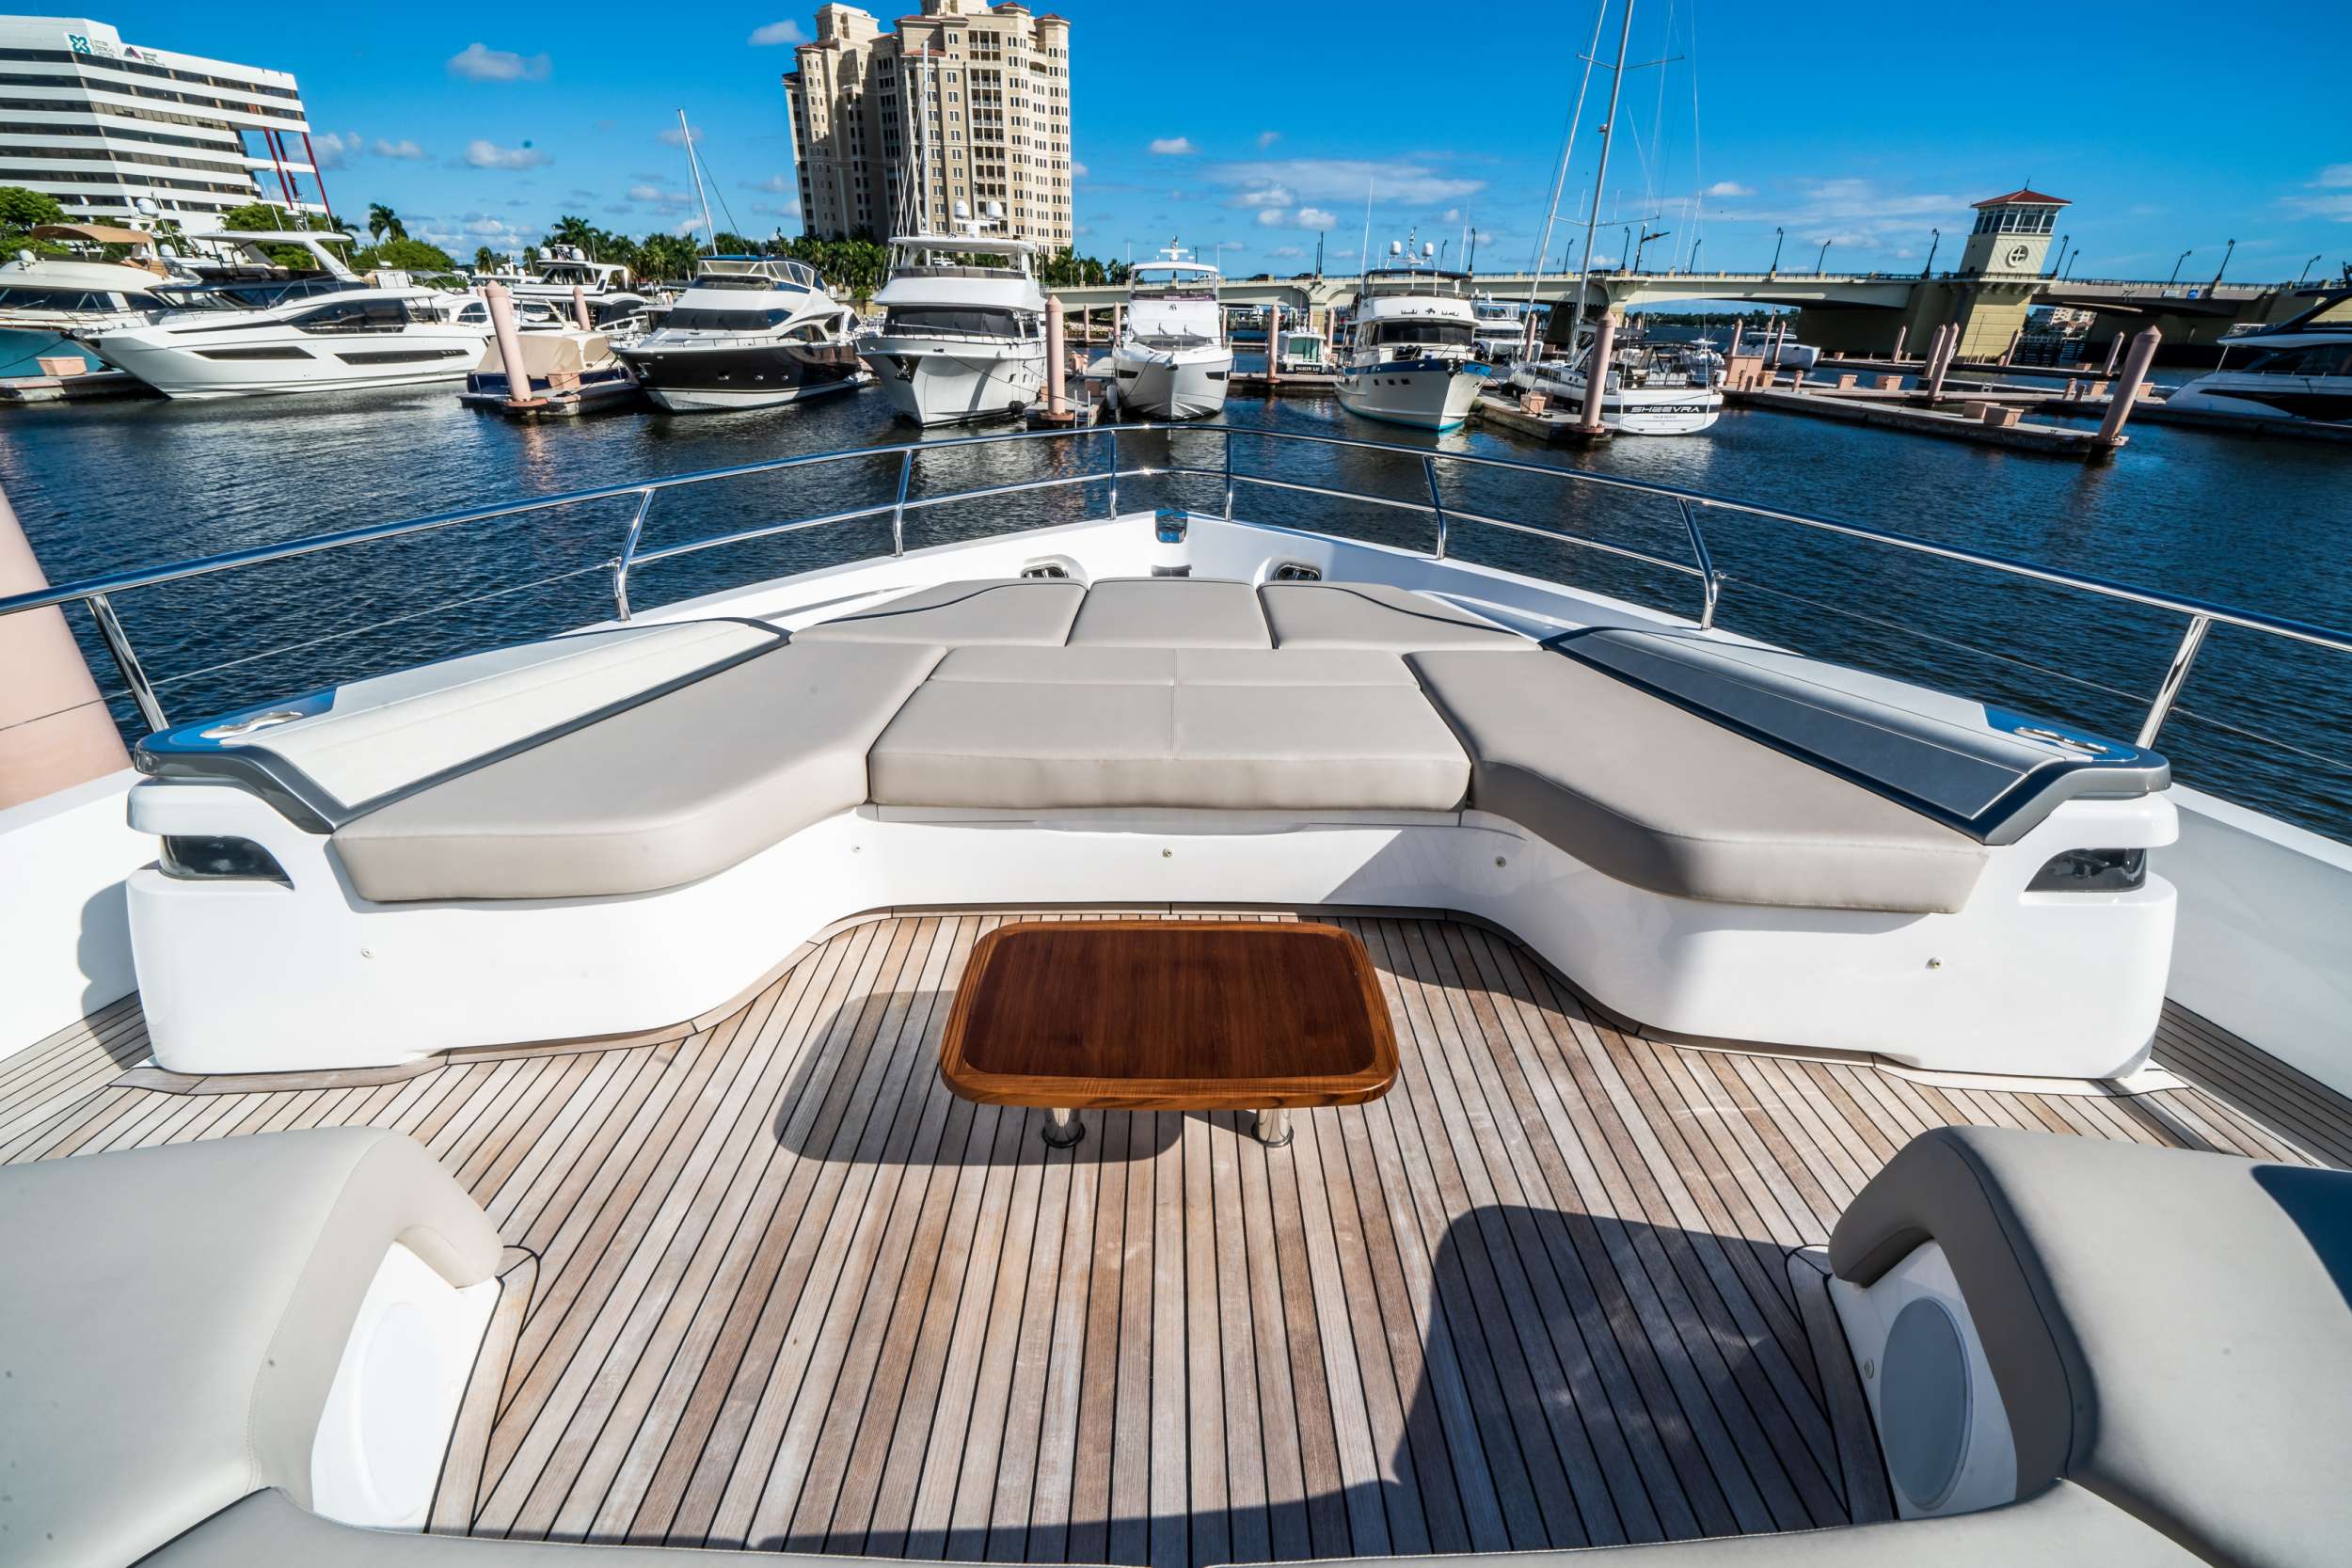 RECORD YEAR Yacht Charter - Foredeck Lounging